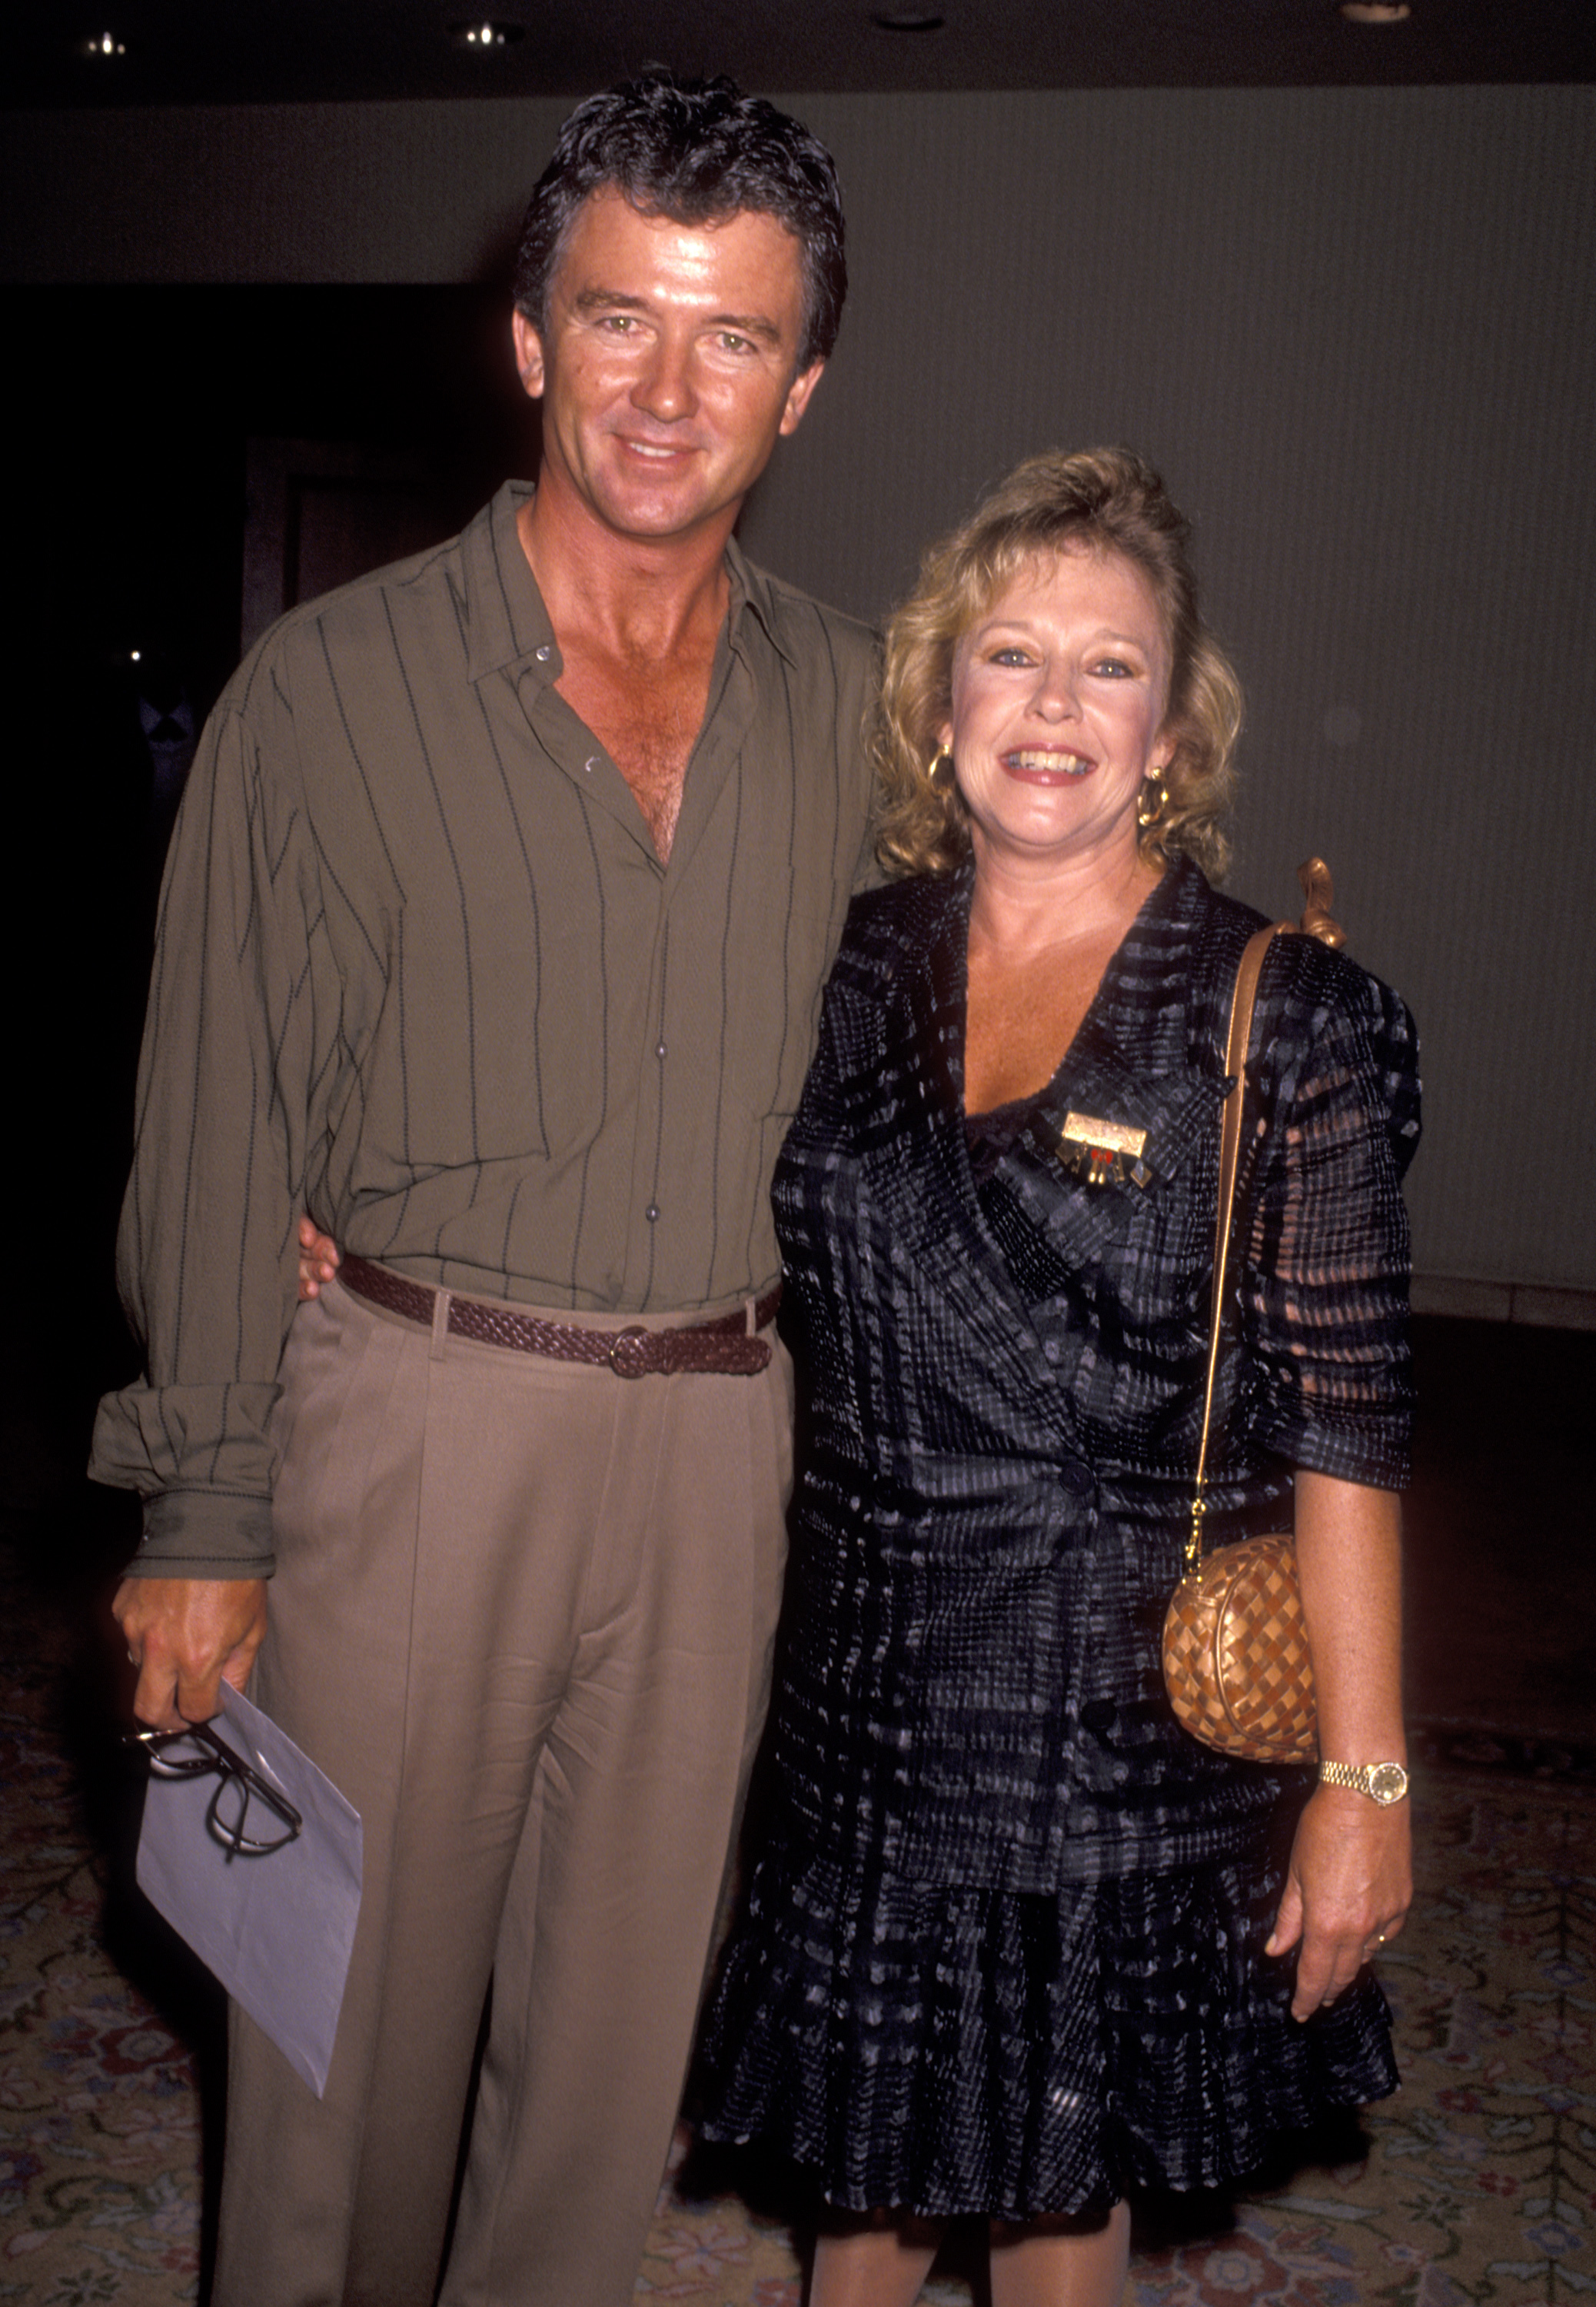 Patrick Duffy and his wife Carlyn Rosser at the ABC Fall TCA Press Tour on July 21, 1991, in Universal City, California | Source: Getty Images